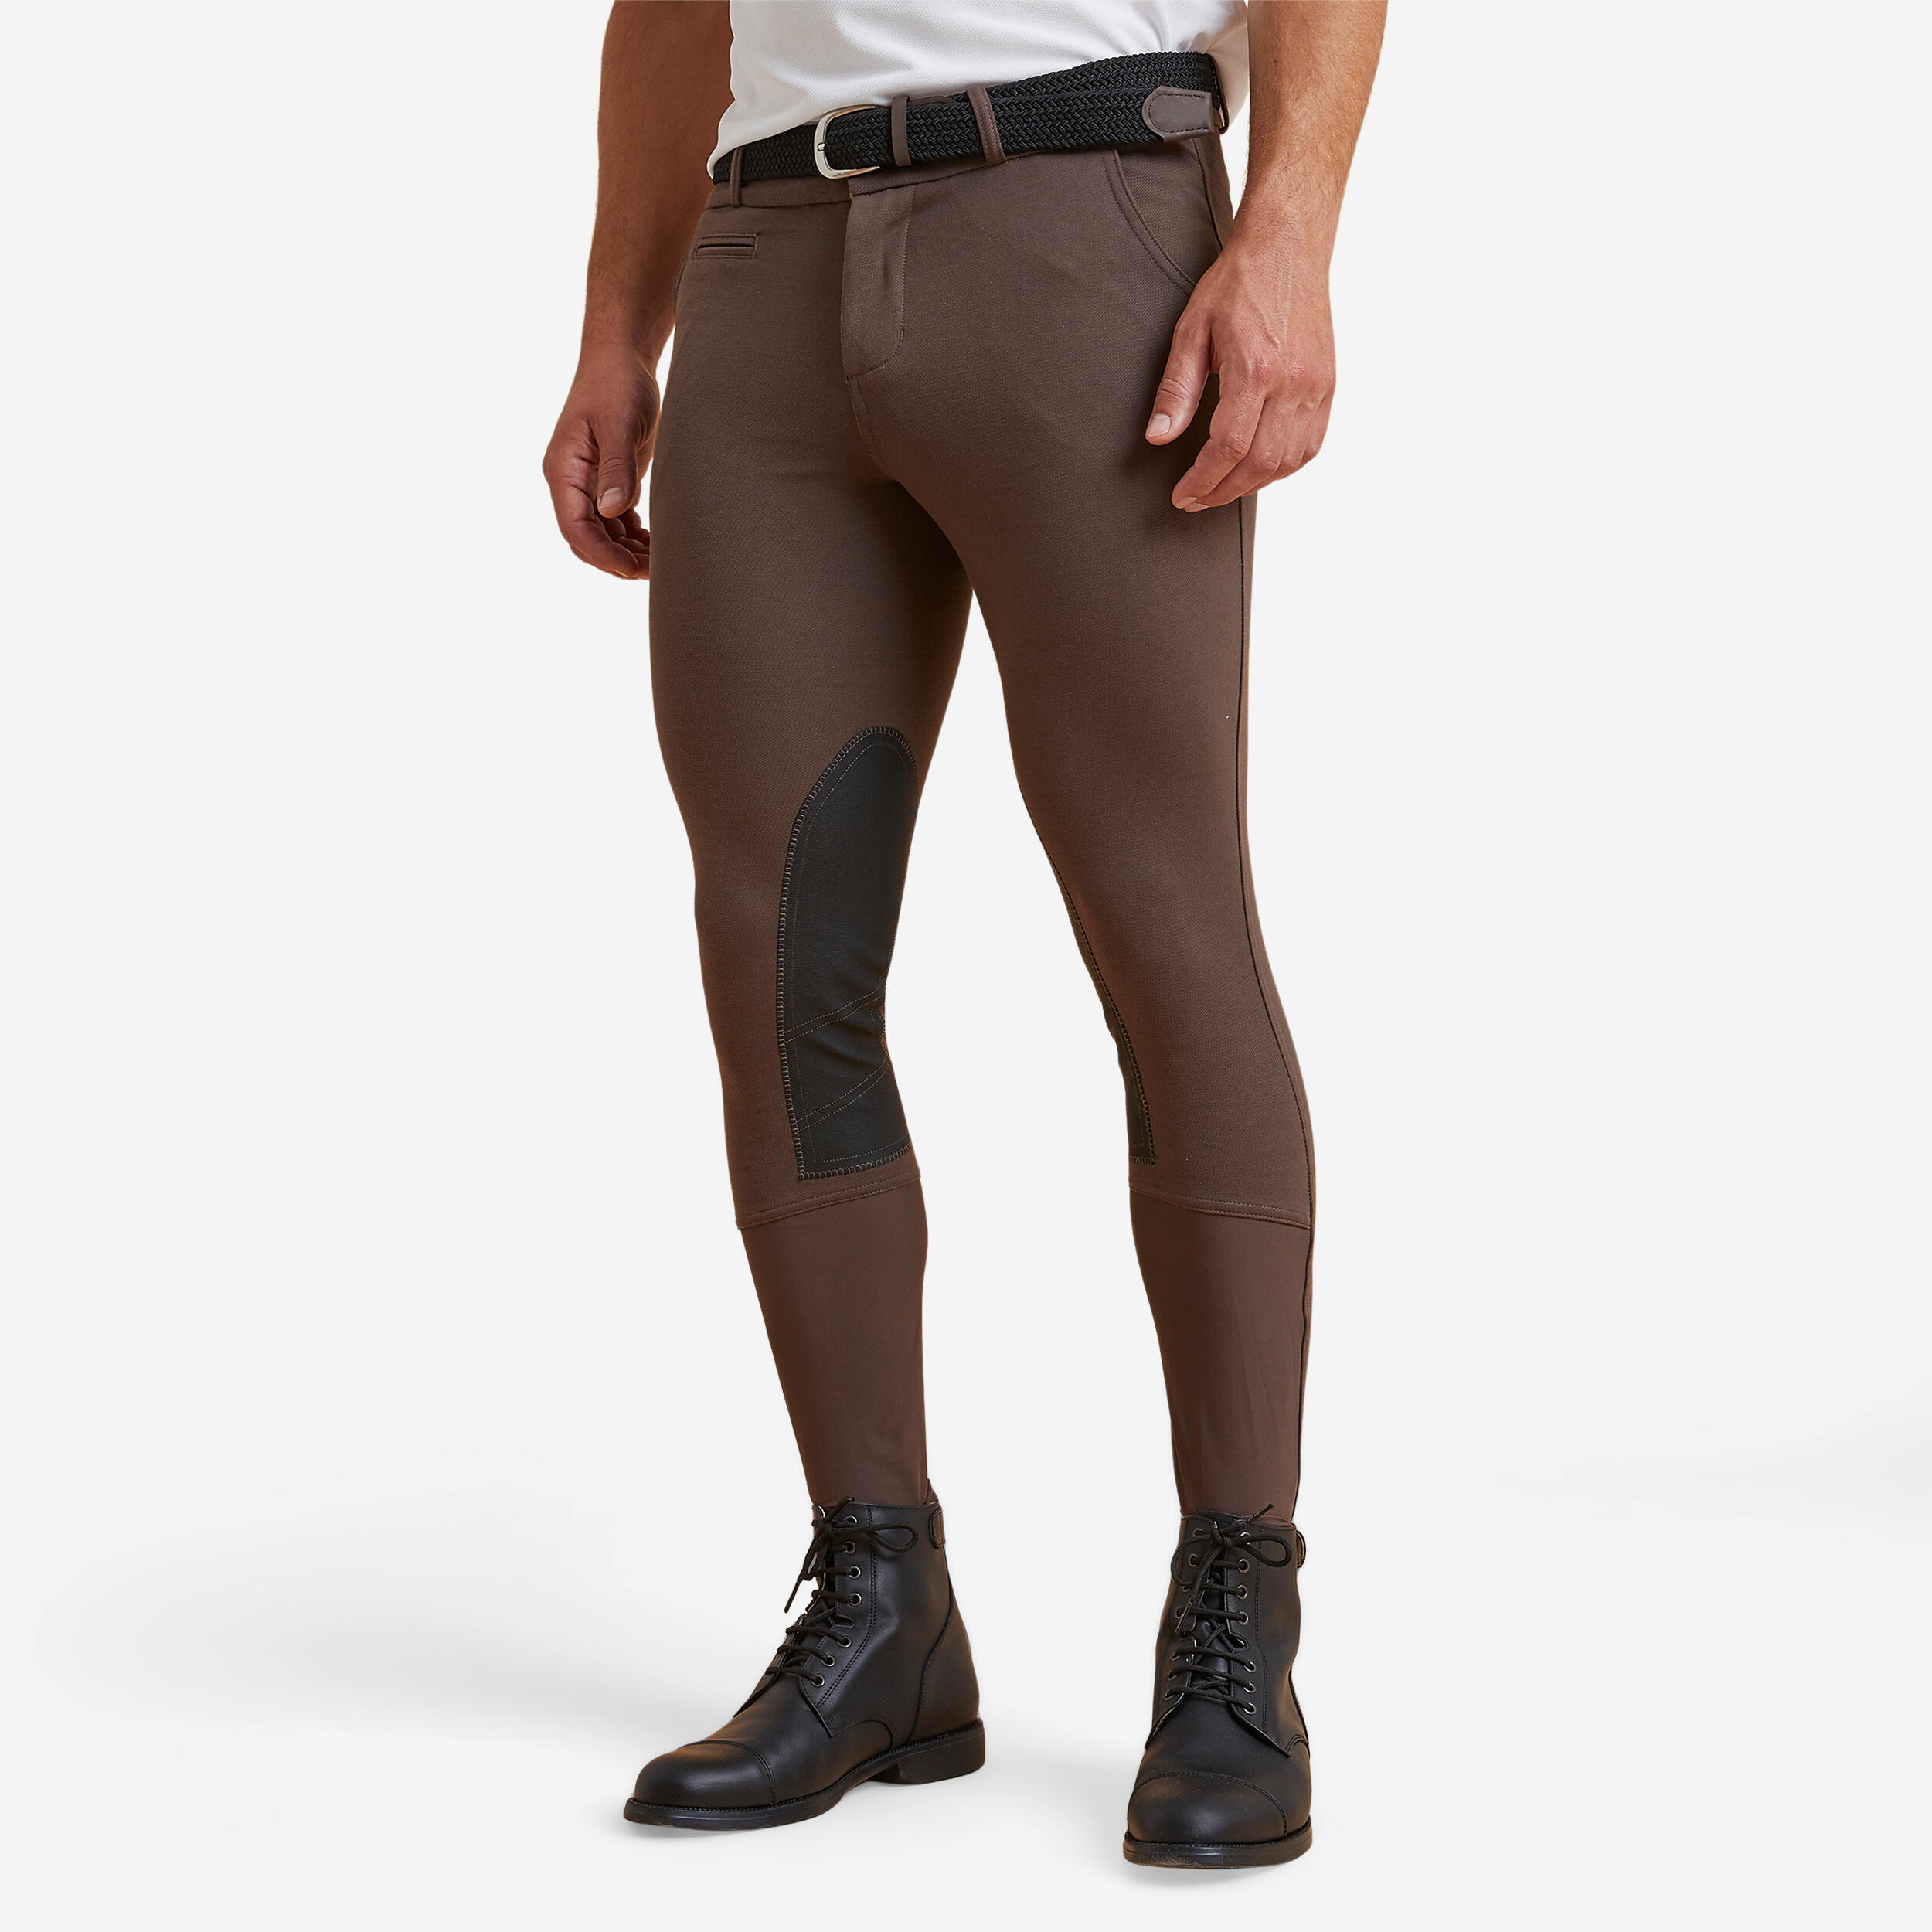 Men's four-way stretch performance riding breeches